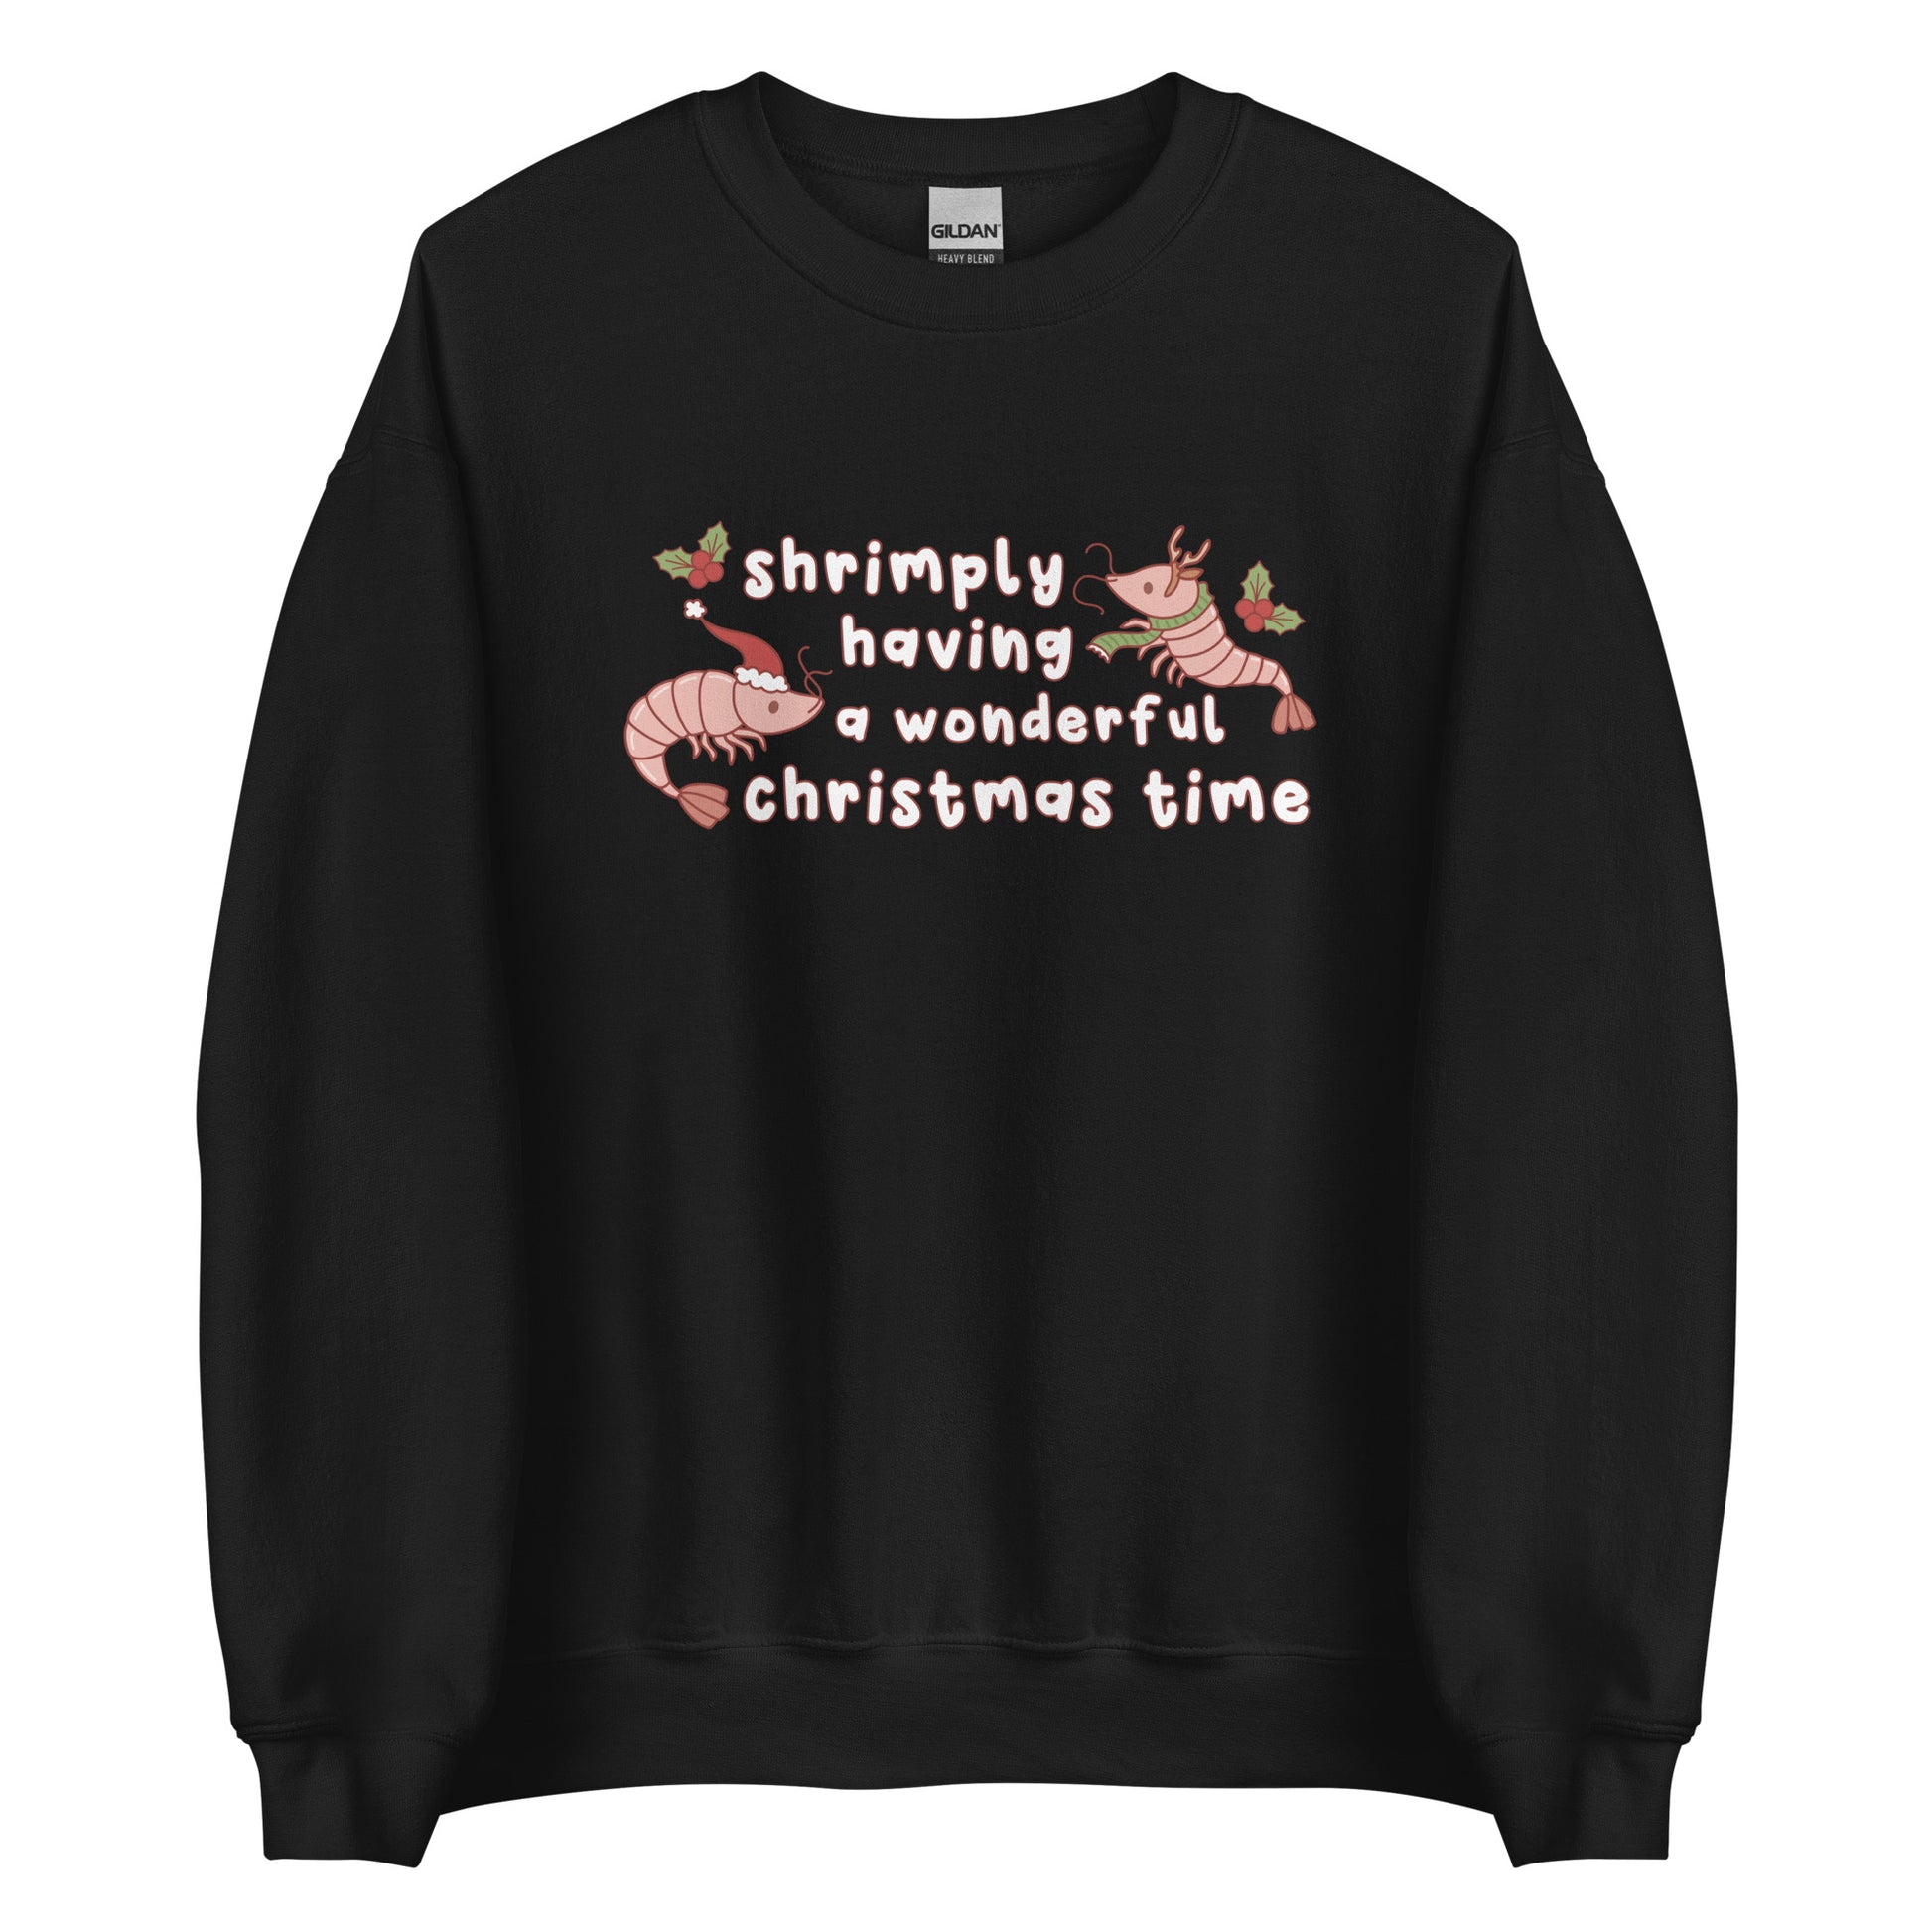 A white crewneck sweatshirt featuring an illustration of two festive shrimp - one with a Santa hat, and one with reindeer antlers. Text between the shrimp reads "shrimply having a wonderful Christmas time".